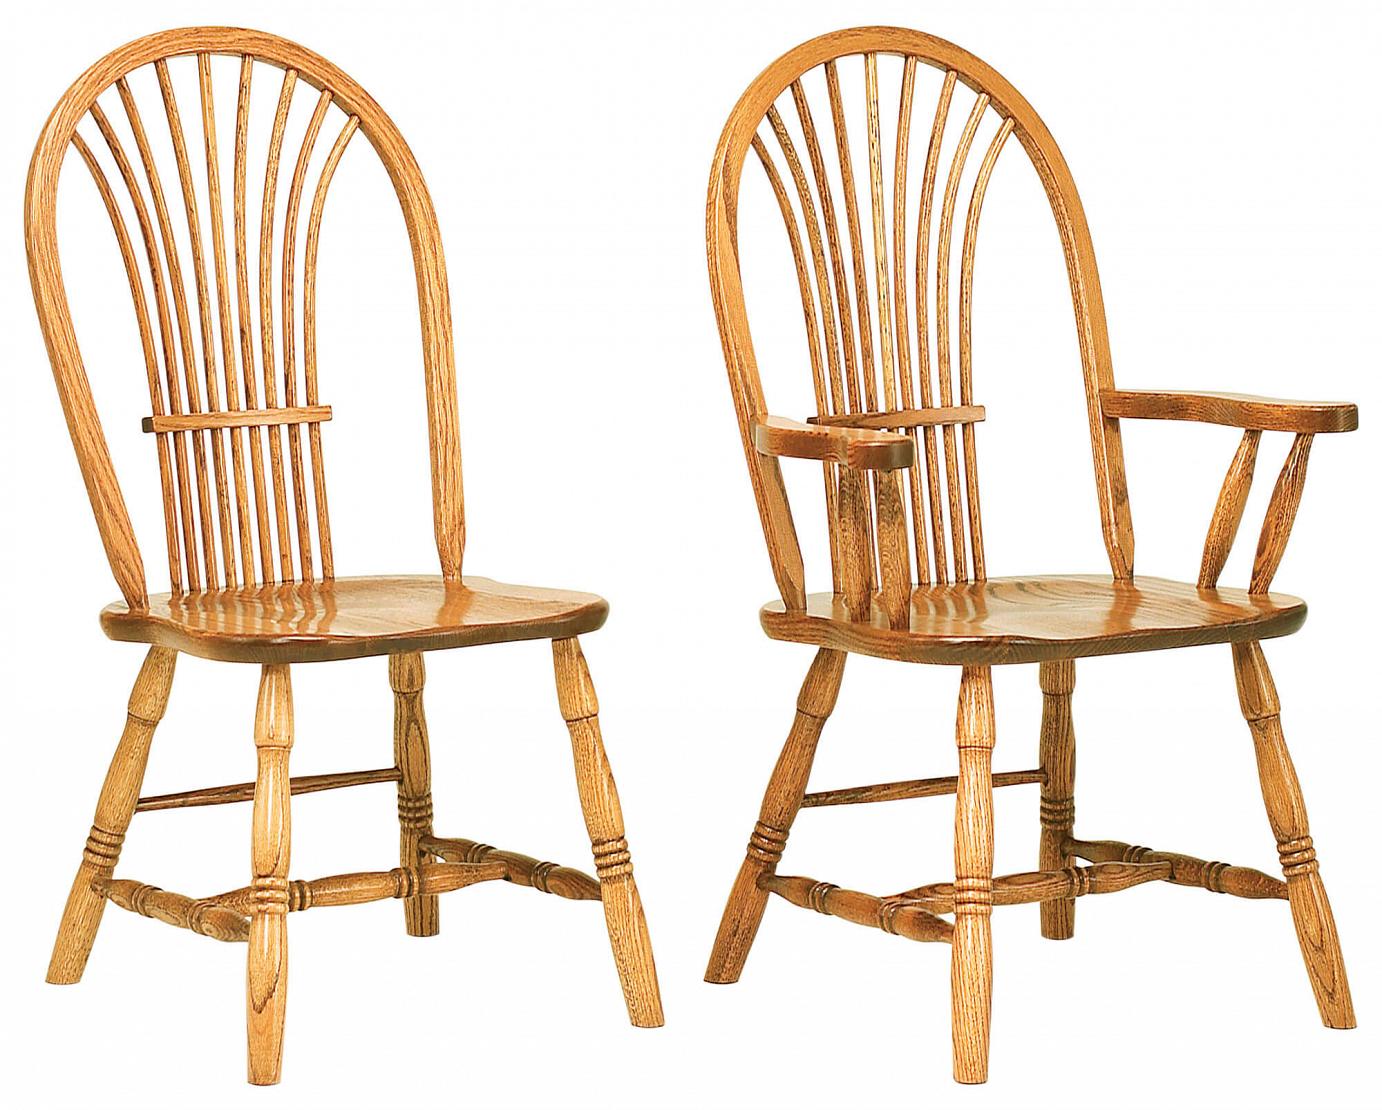 RH Yoder Country Sheaf Chairs